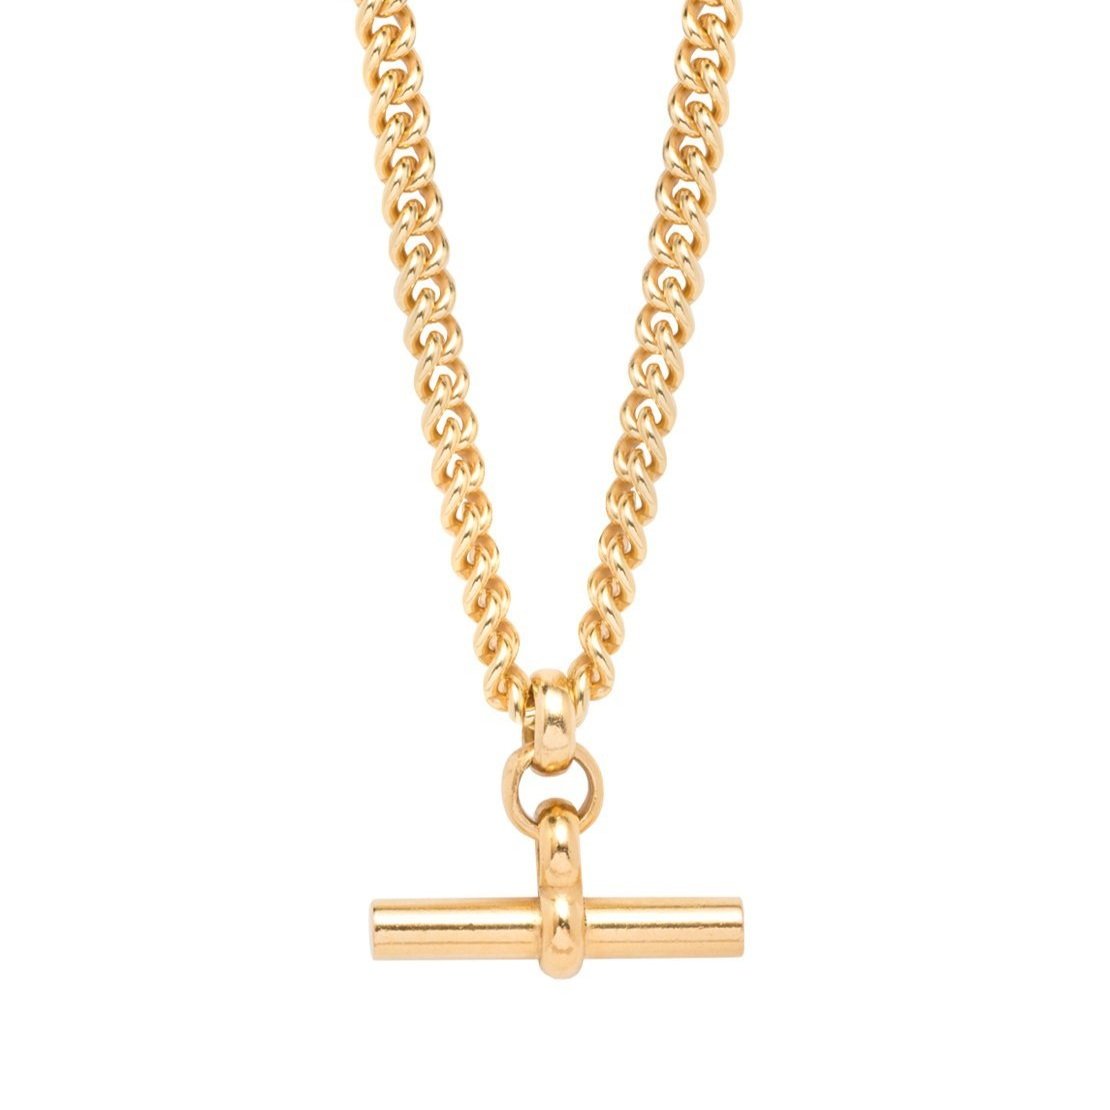 Gold T-Bar Curb Chain Necklace